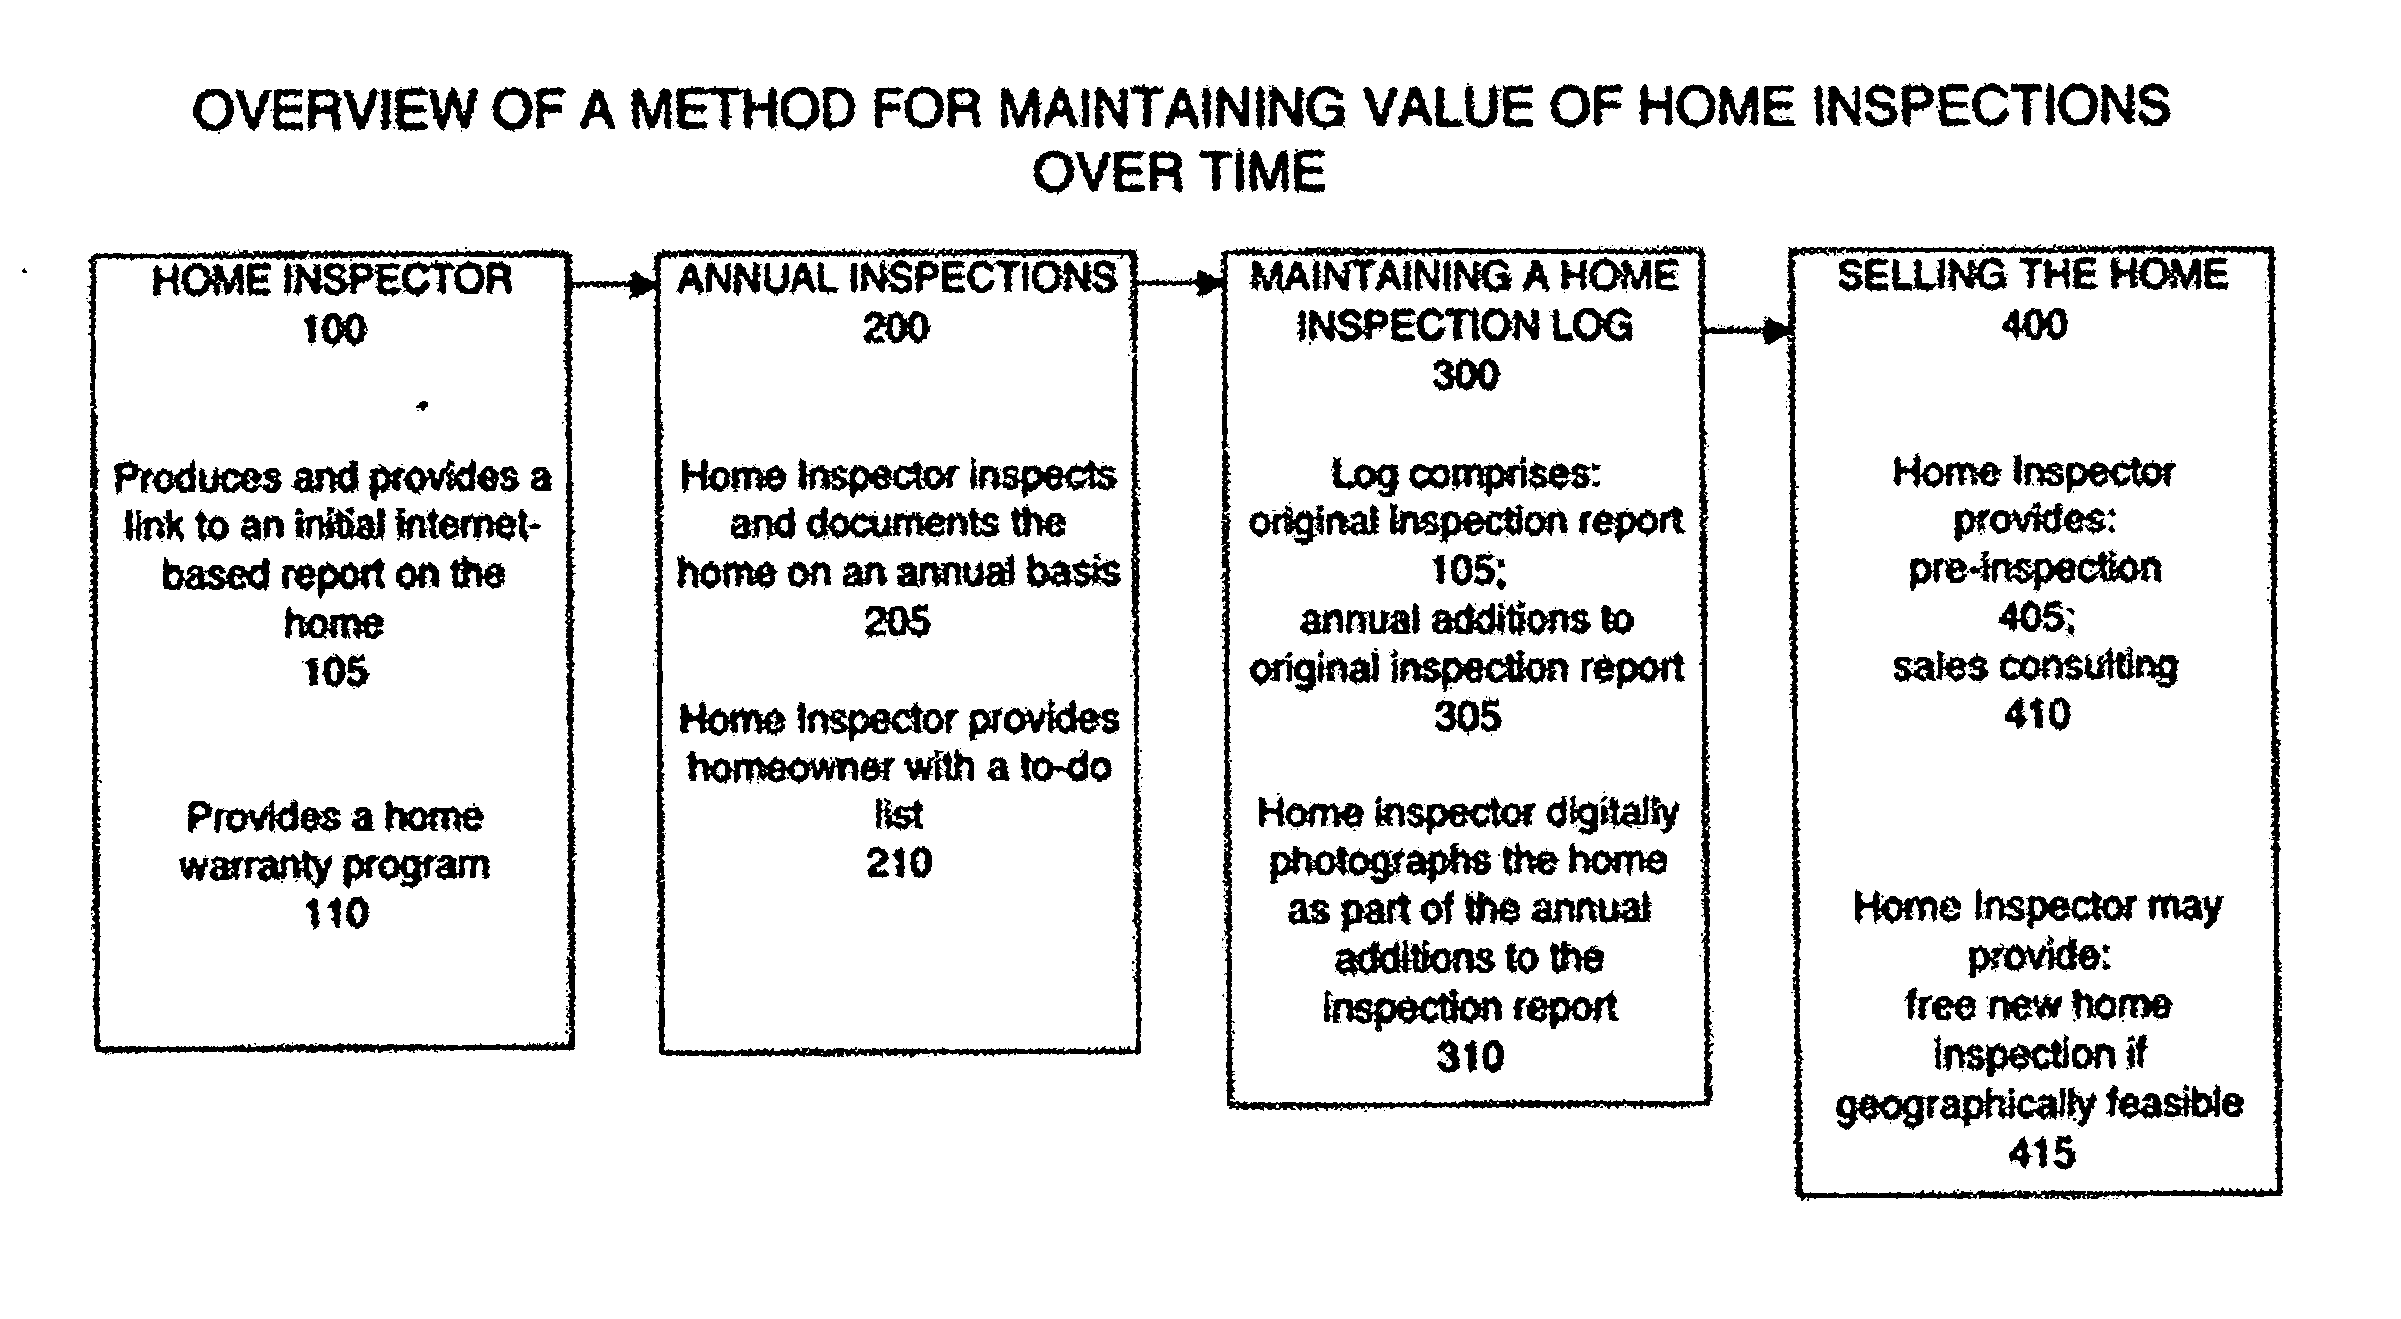 Method of Maintaining the Value of Home Inspections Over Time